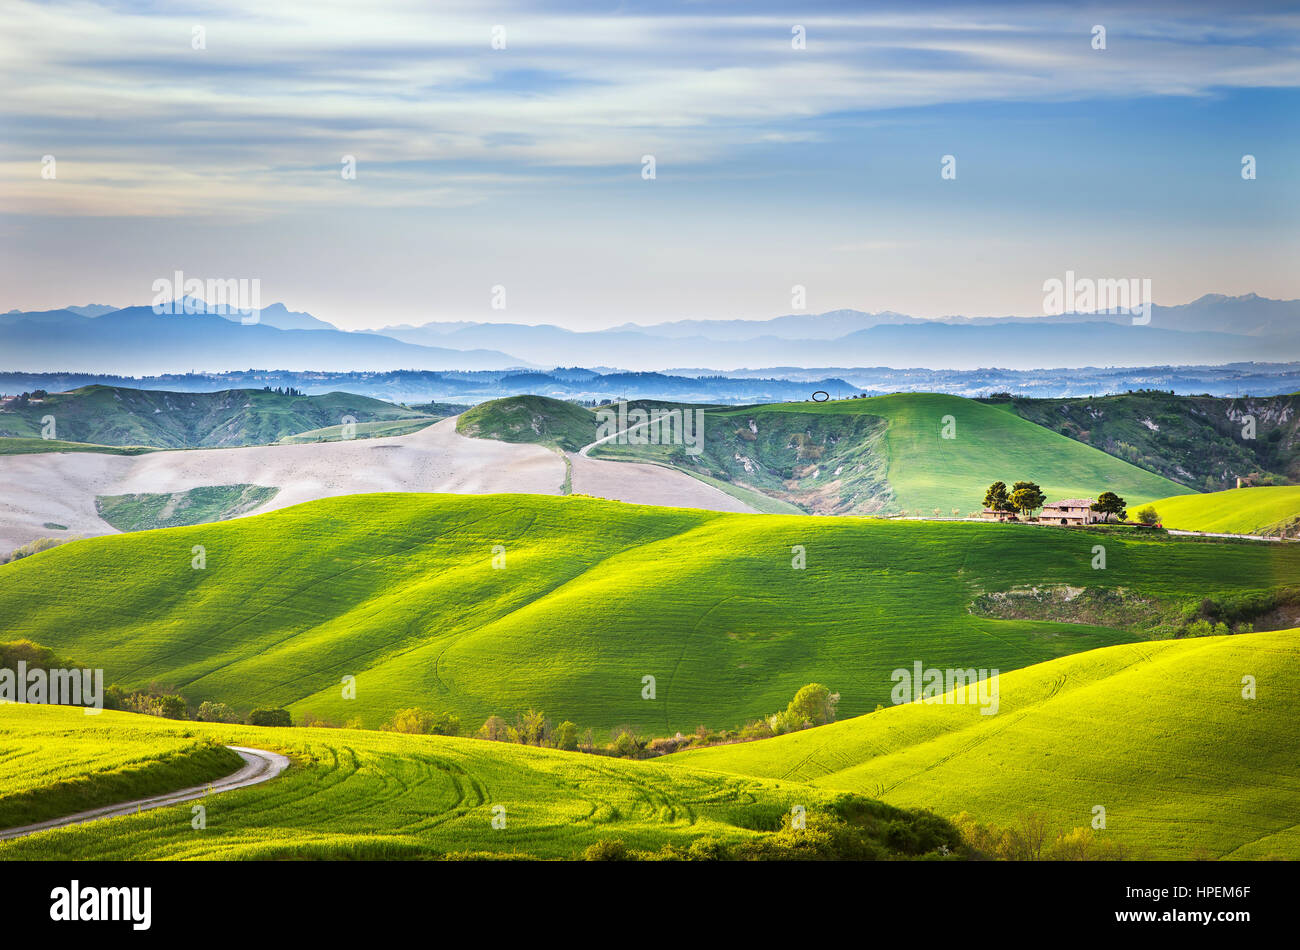 Tuscany spring, rolling hills on sunset. Volterra rural landscape. Green fields and farmland. Italy, Europe Stock Photo